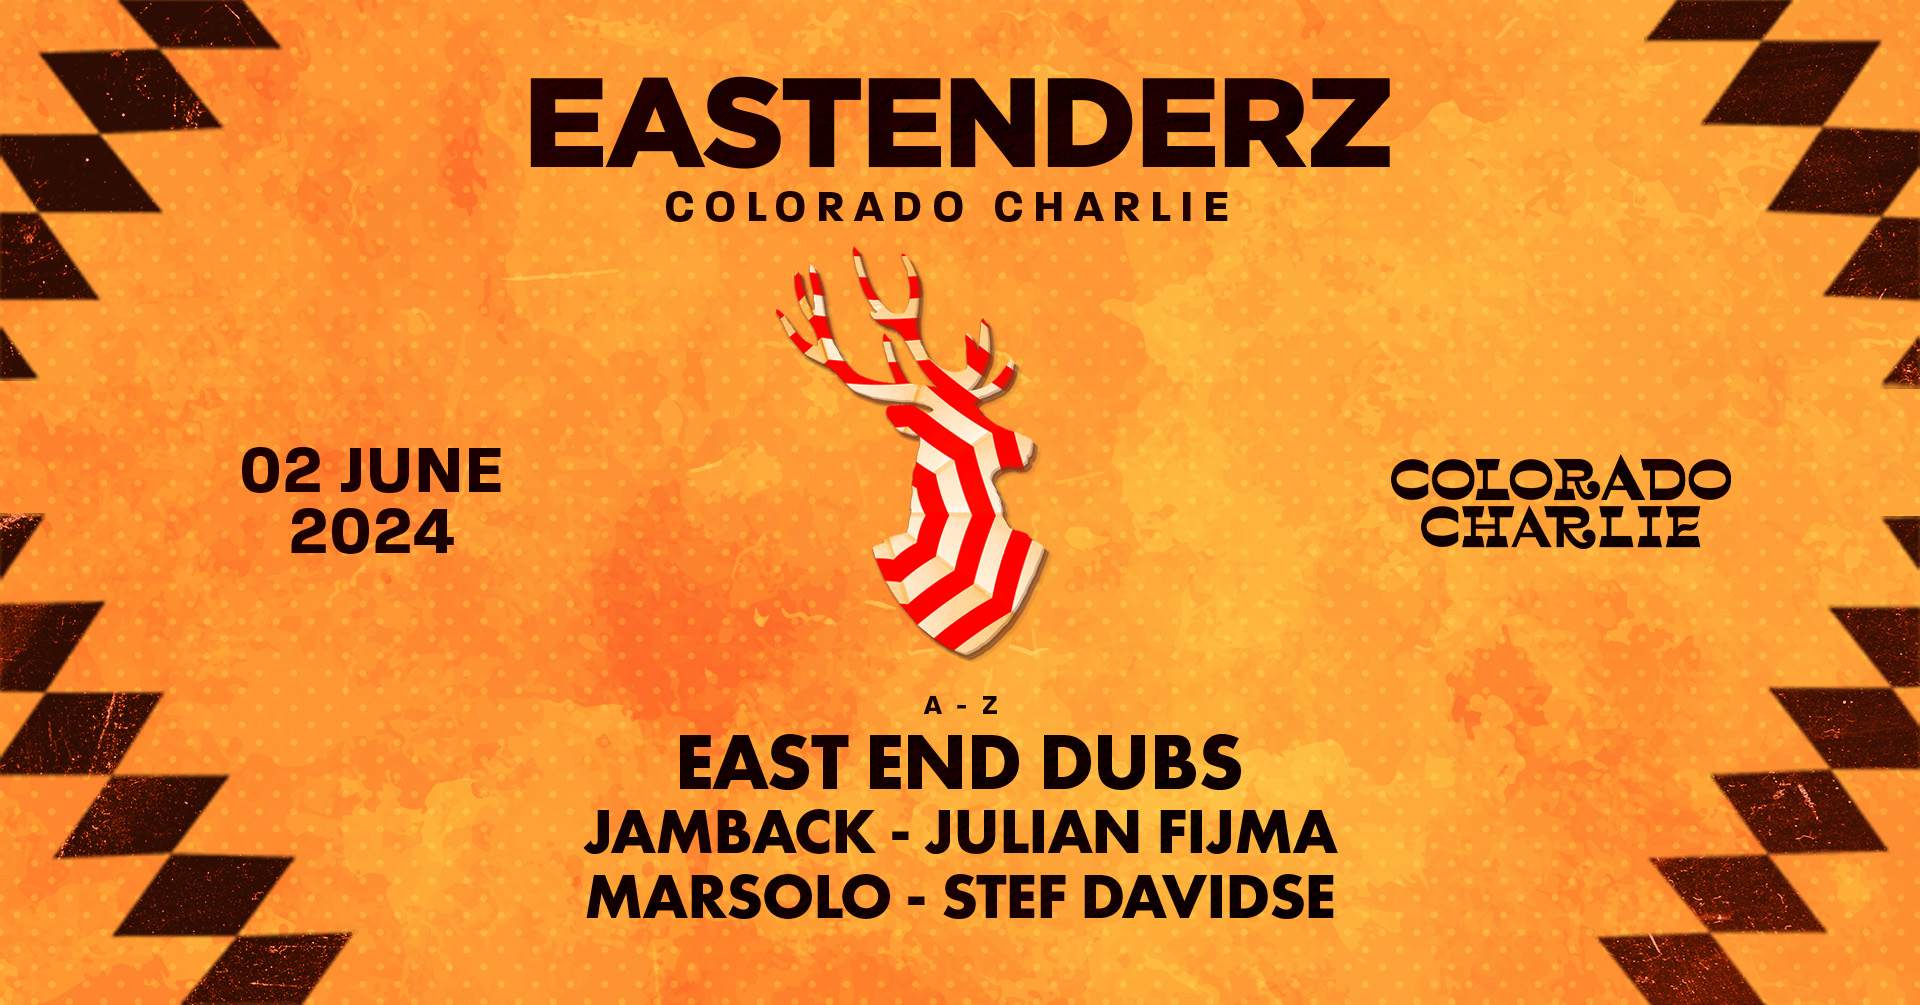 Eastenderz at Colorado Charlie [SOLD OUT] - Página frontal